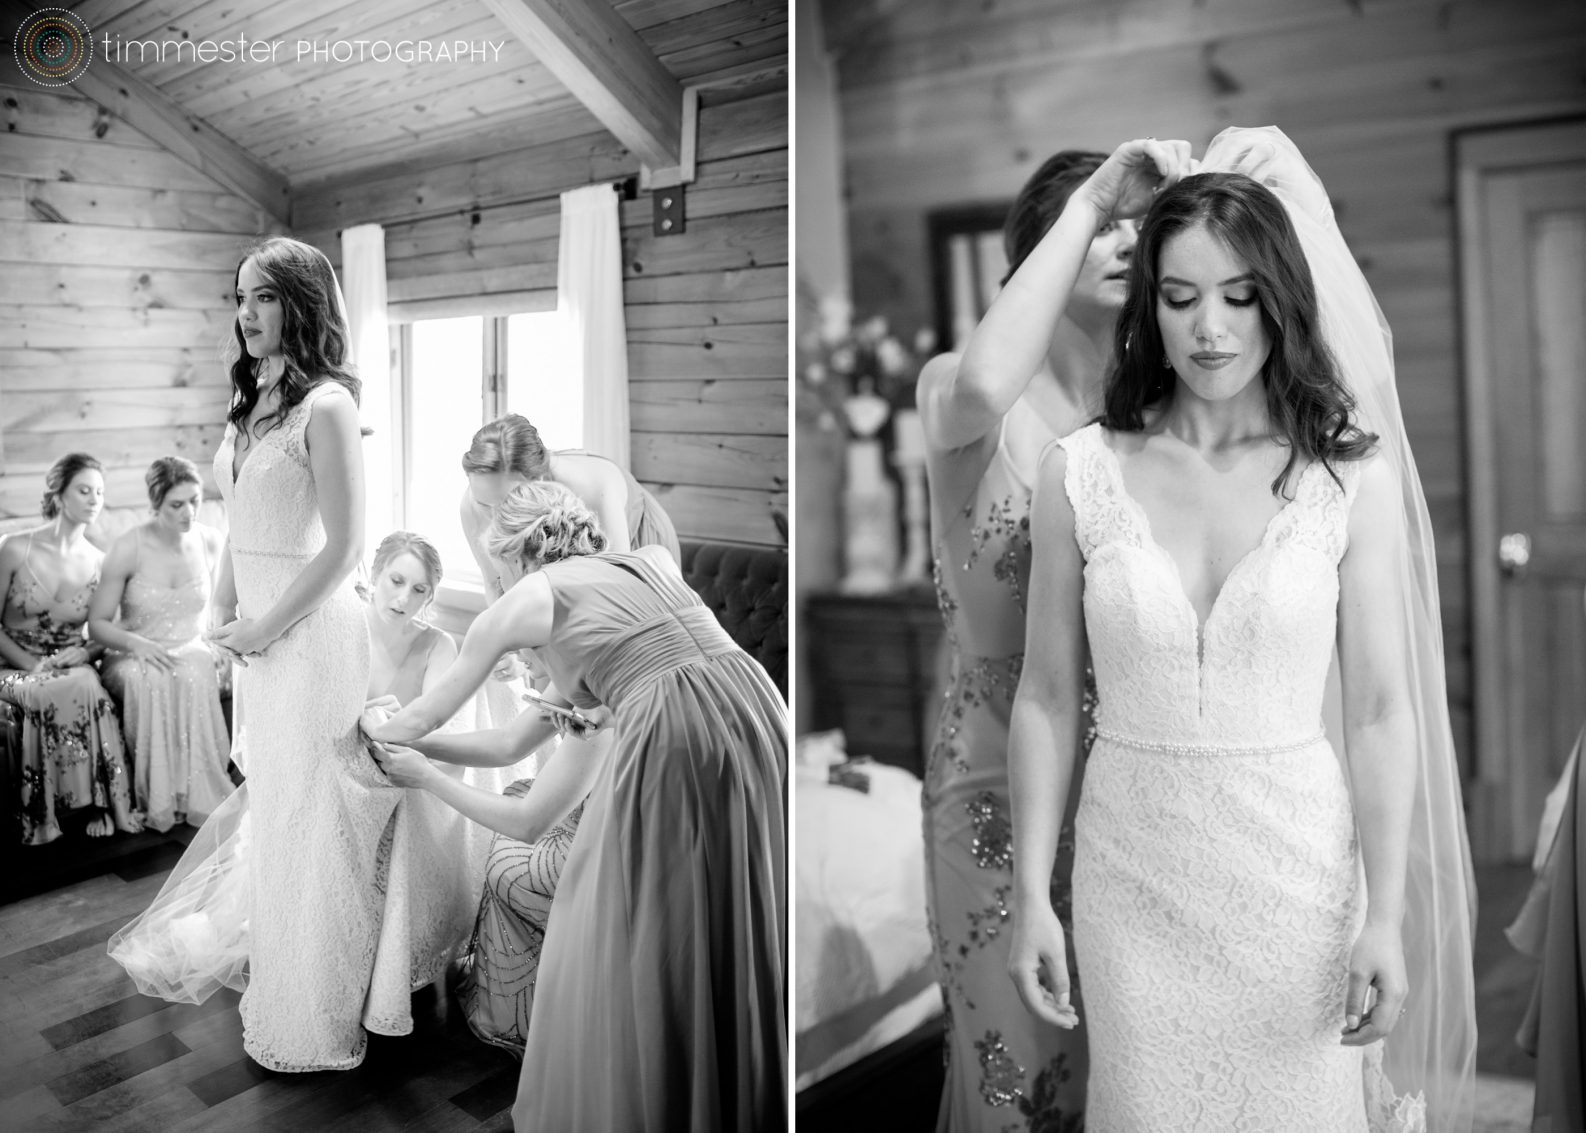 Bride Chloe prepares for her wedding ceremony at The Barn at Valhalla in Chapel Hill, NC.